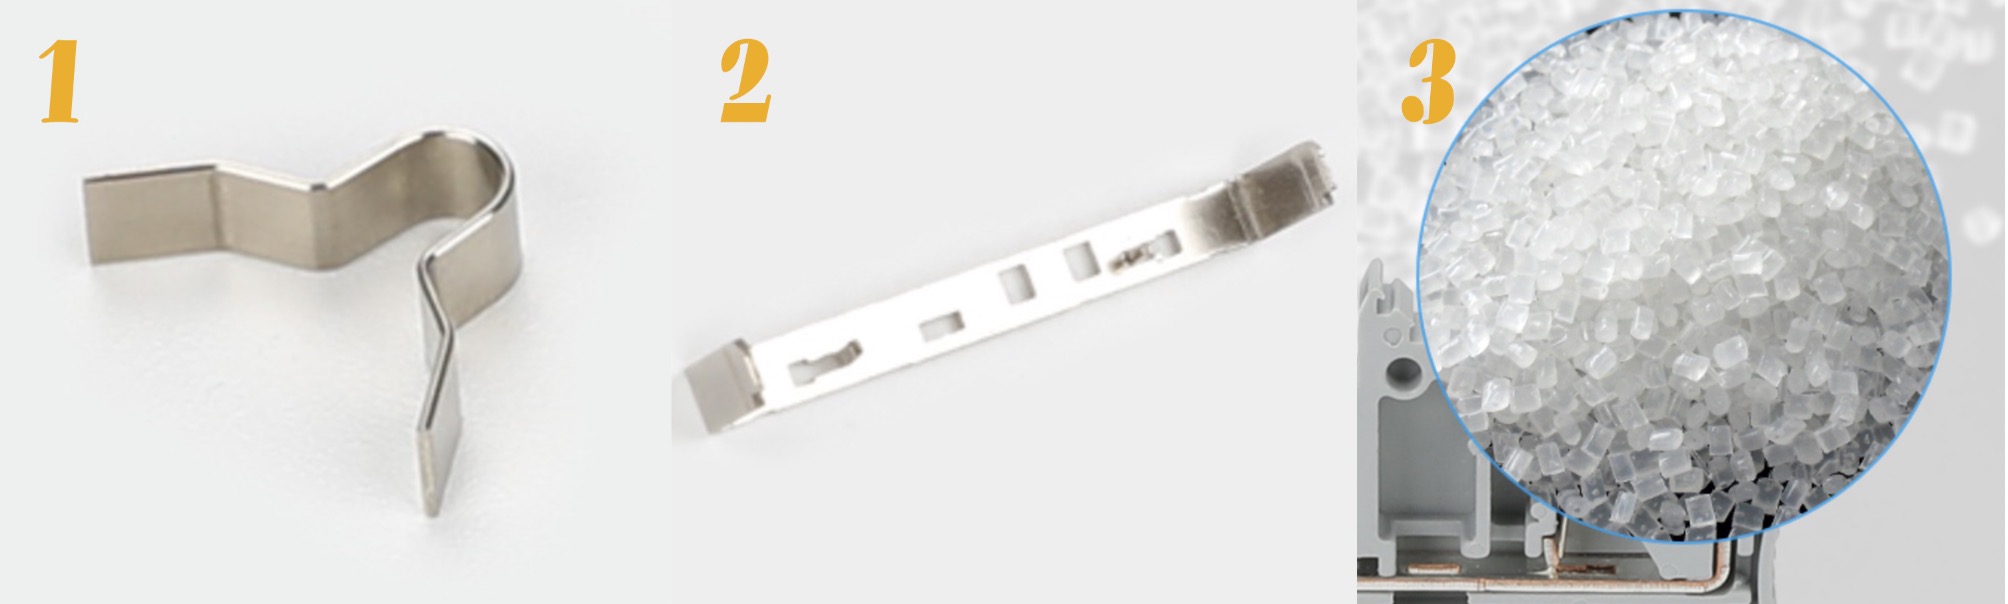 Terminal Block Electrical Connector TP4-4-GY